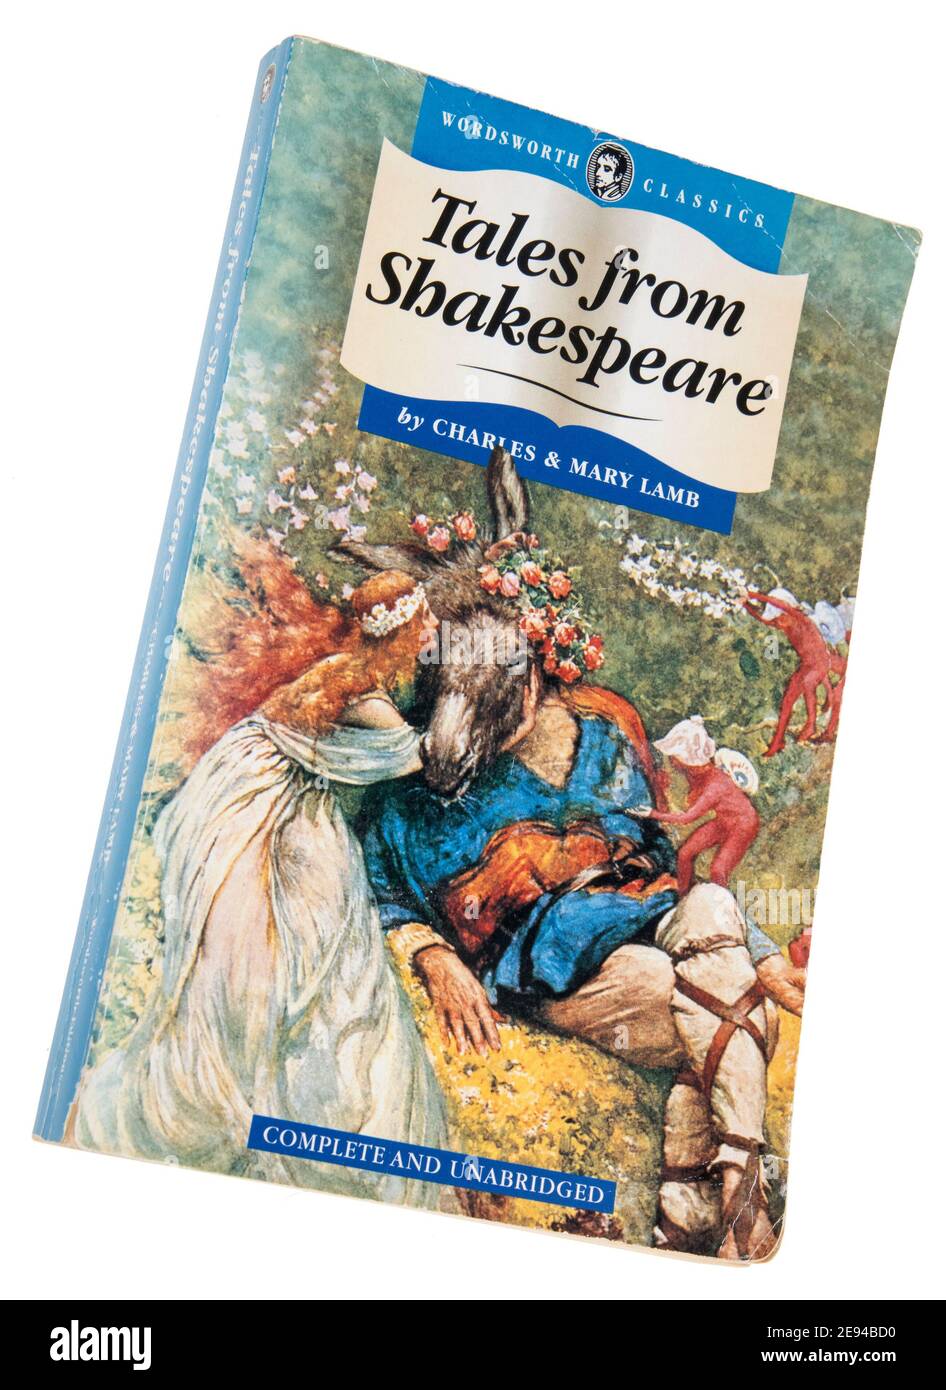 Tales from Shakespeare paperback book by Charles and Mary Lamb in the Wordsworth Classics series published in 1994 Stock Photo